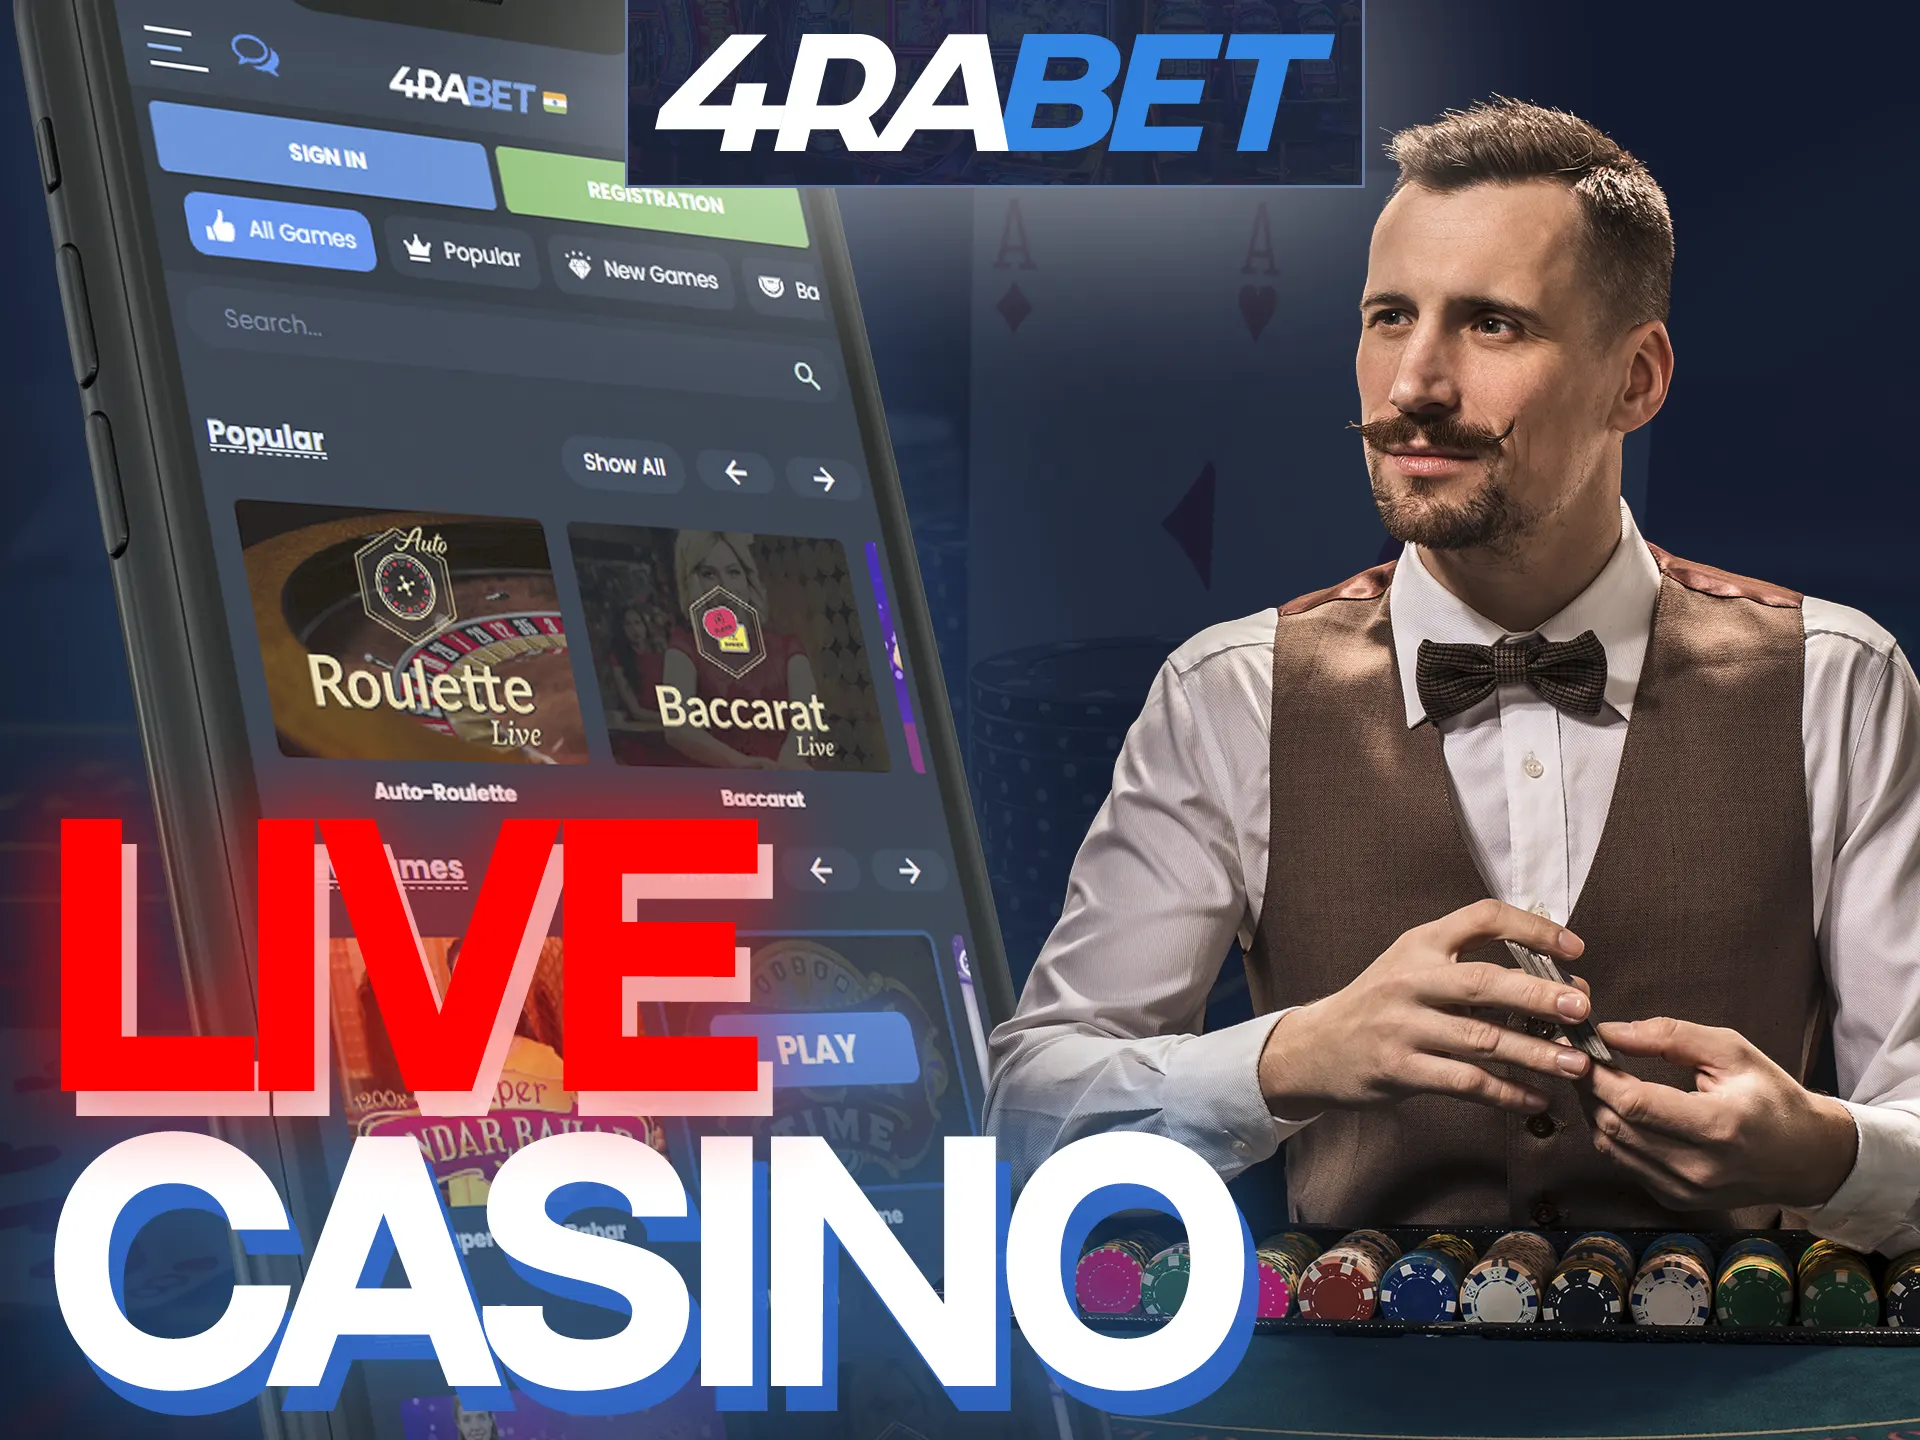 Check out the live casino section of the 4Rabet mobile app.